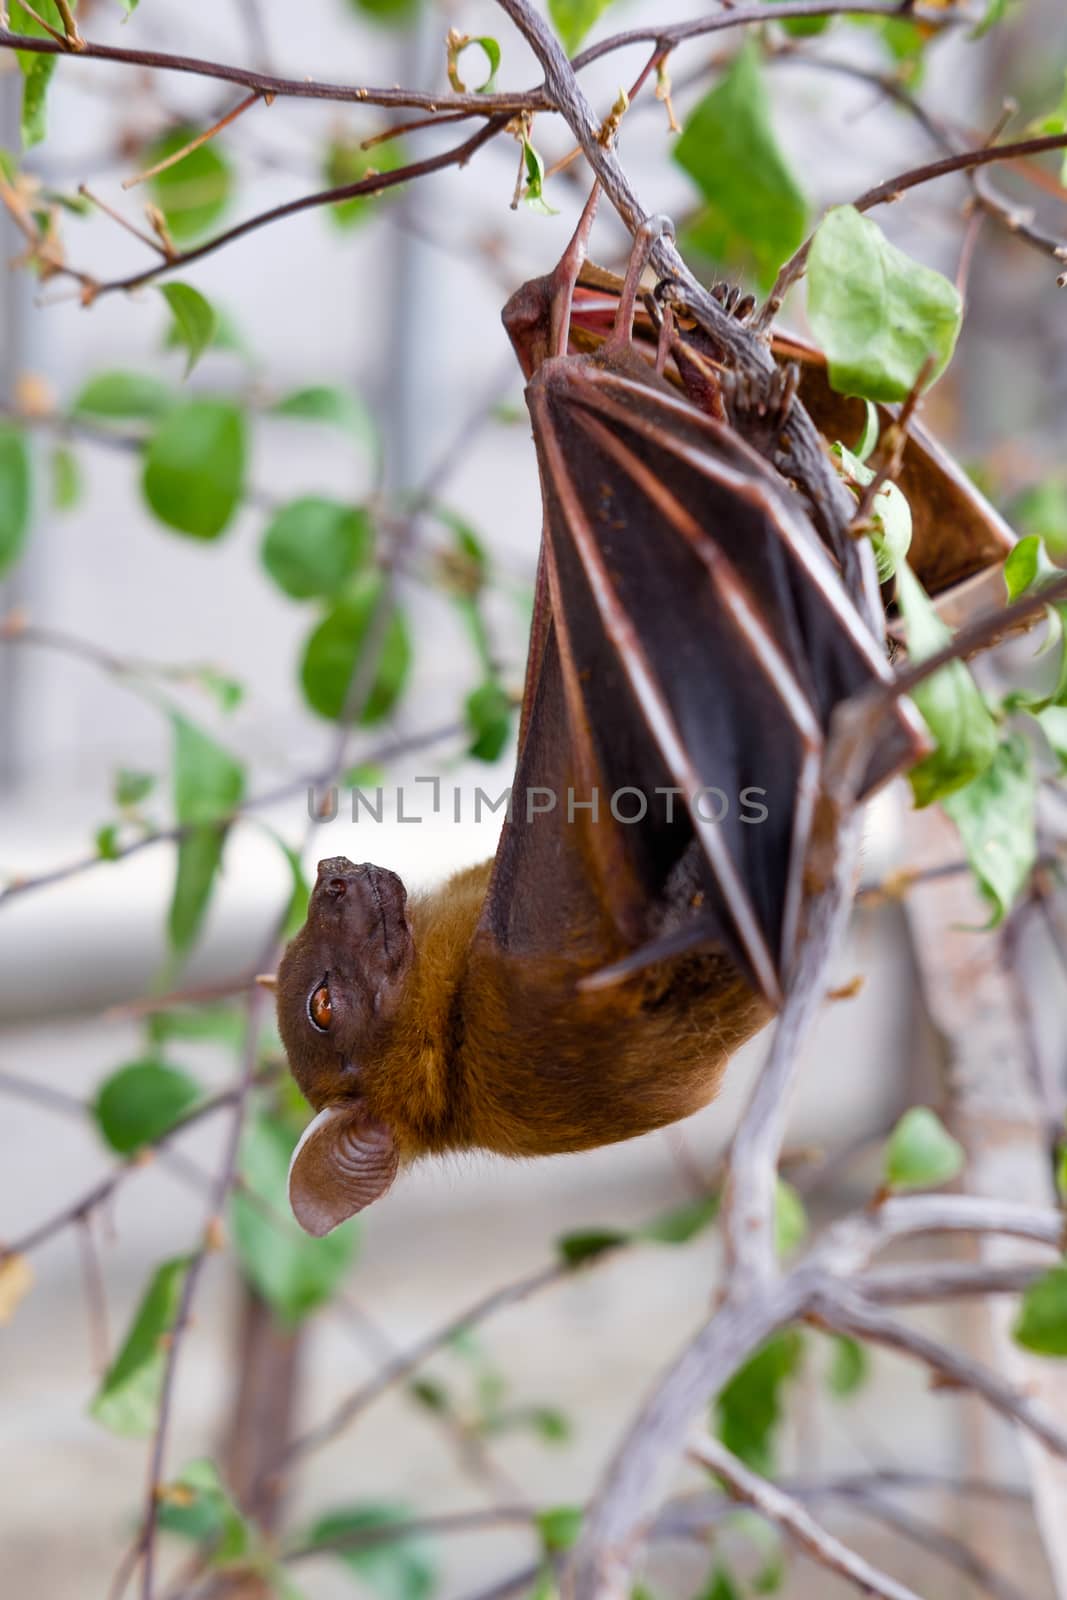 The Lesser short-nosed fruit bat (Cynopterus brachyotis). In the leaves during the daylight